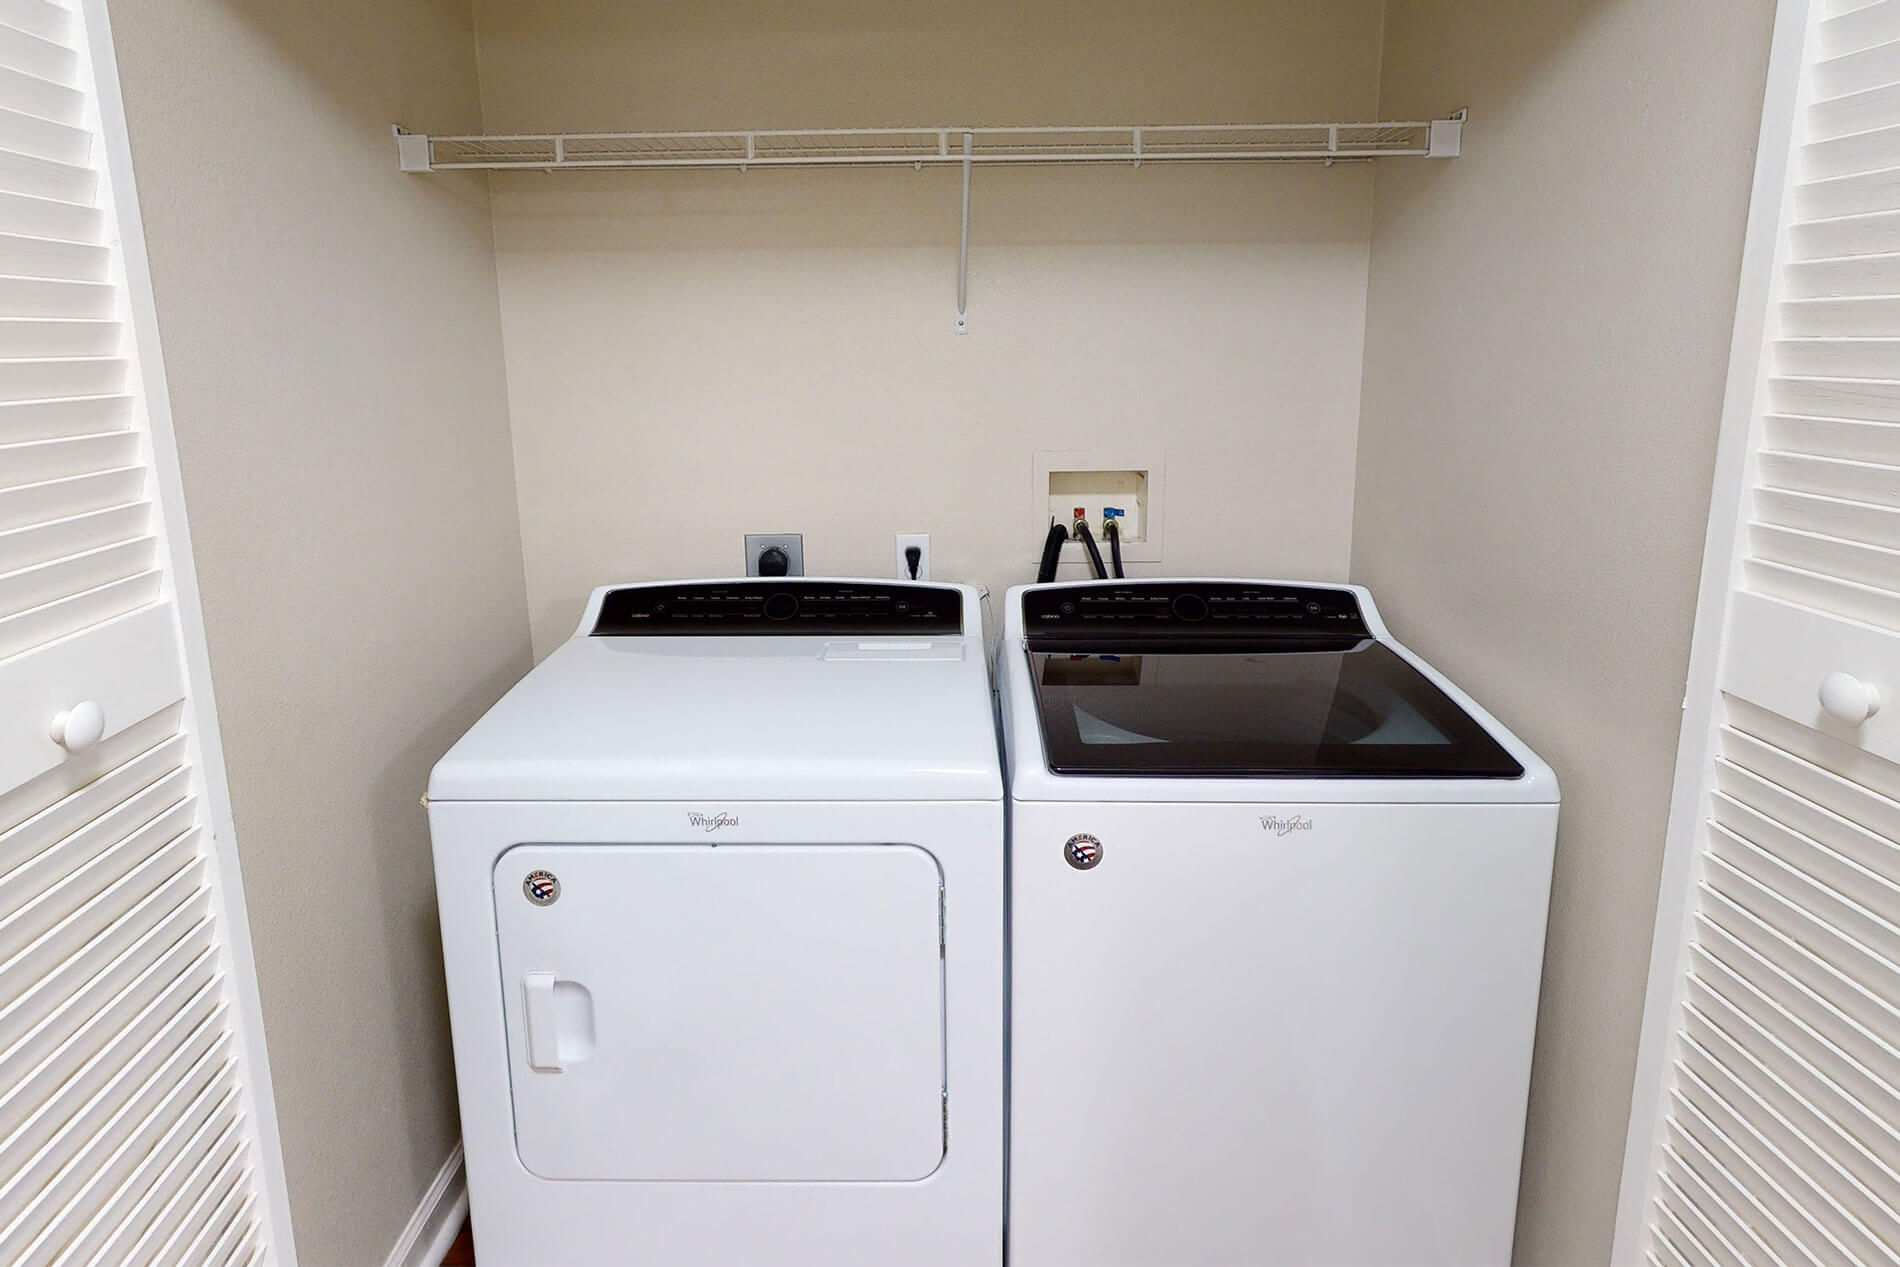 River Terrace apartment washer and dryer